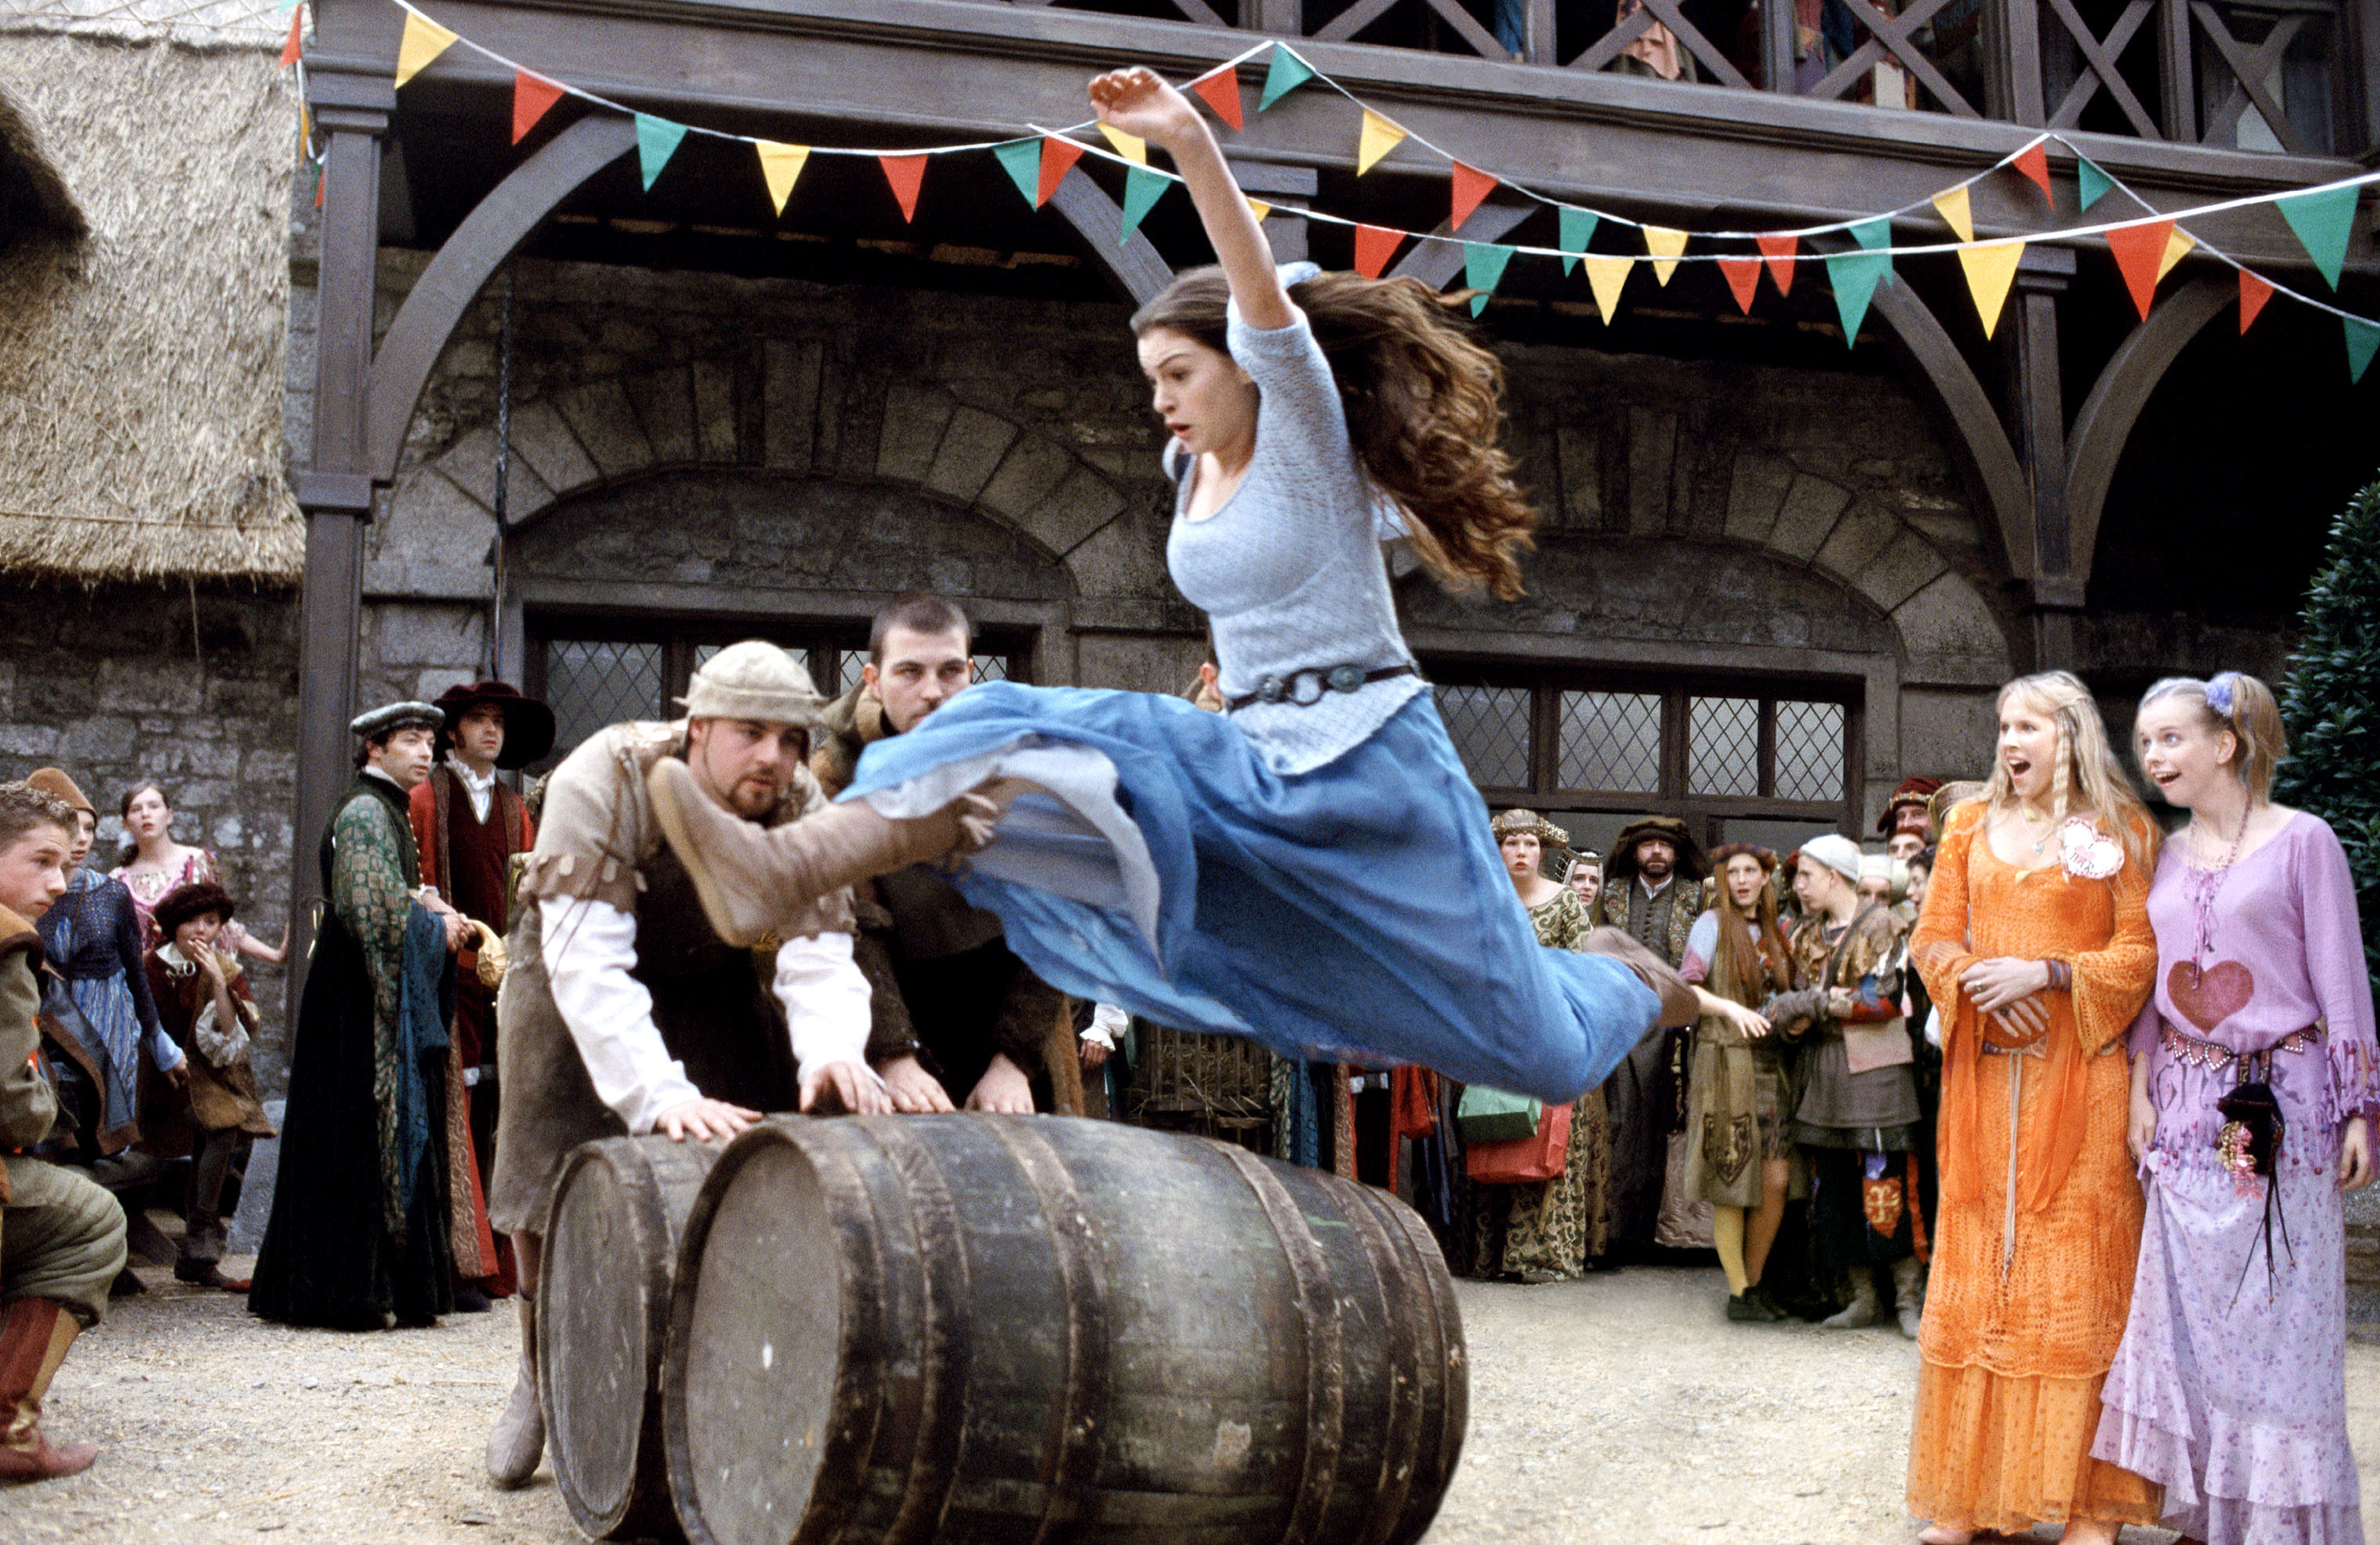 Ella in medieval attire leaps over a barrel at a fair; spectators watch in background